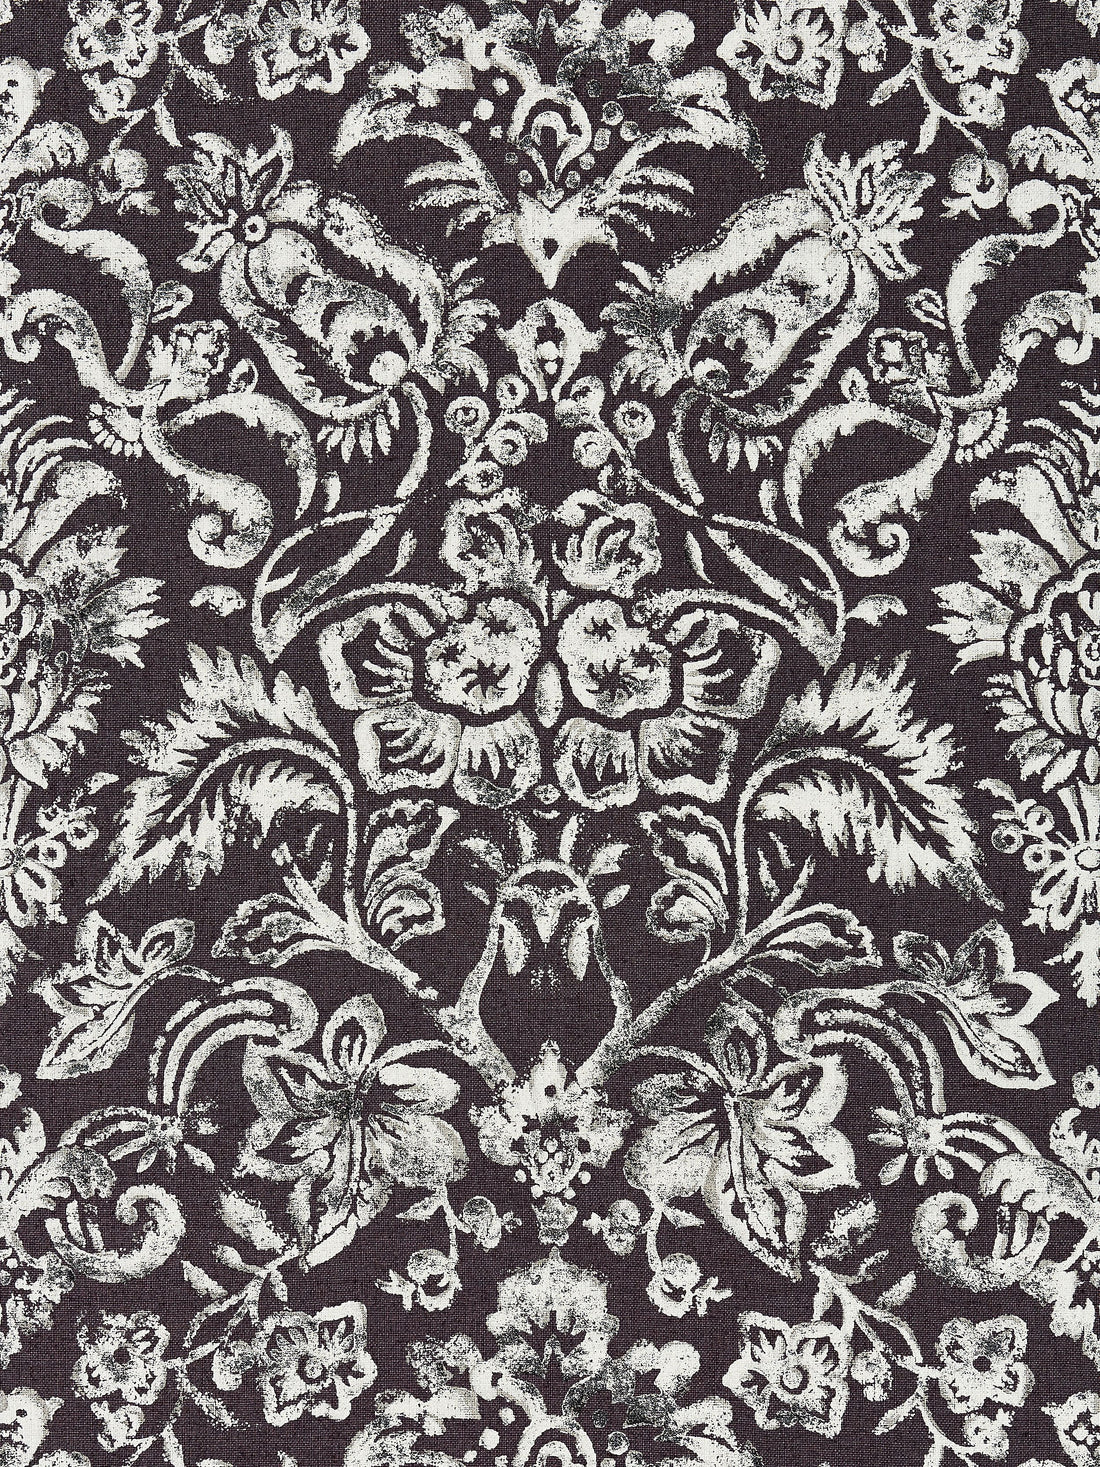 Mansfield Damask Print fabric in graphite and silver color - pattern number SC 000316598 - by Scalamandre in the Scalamandre Fabrics Book 1 collection